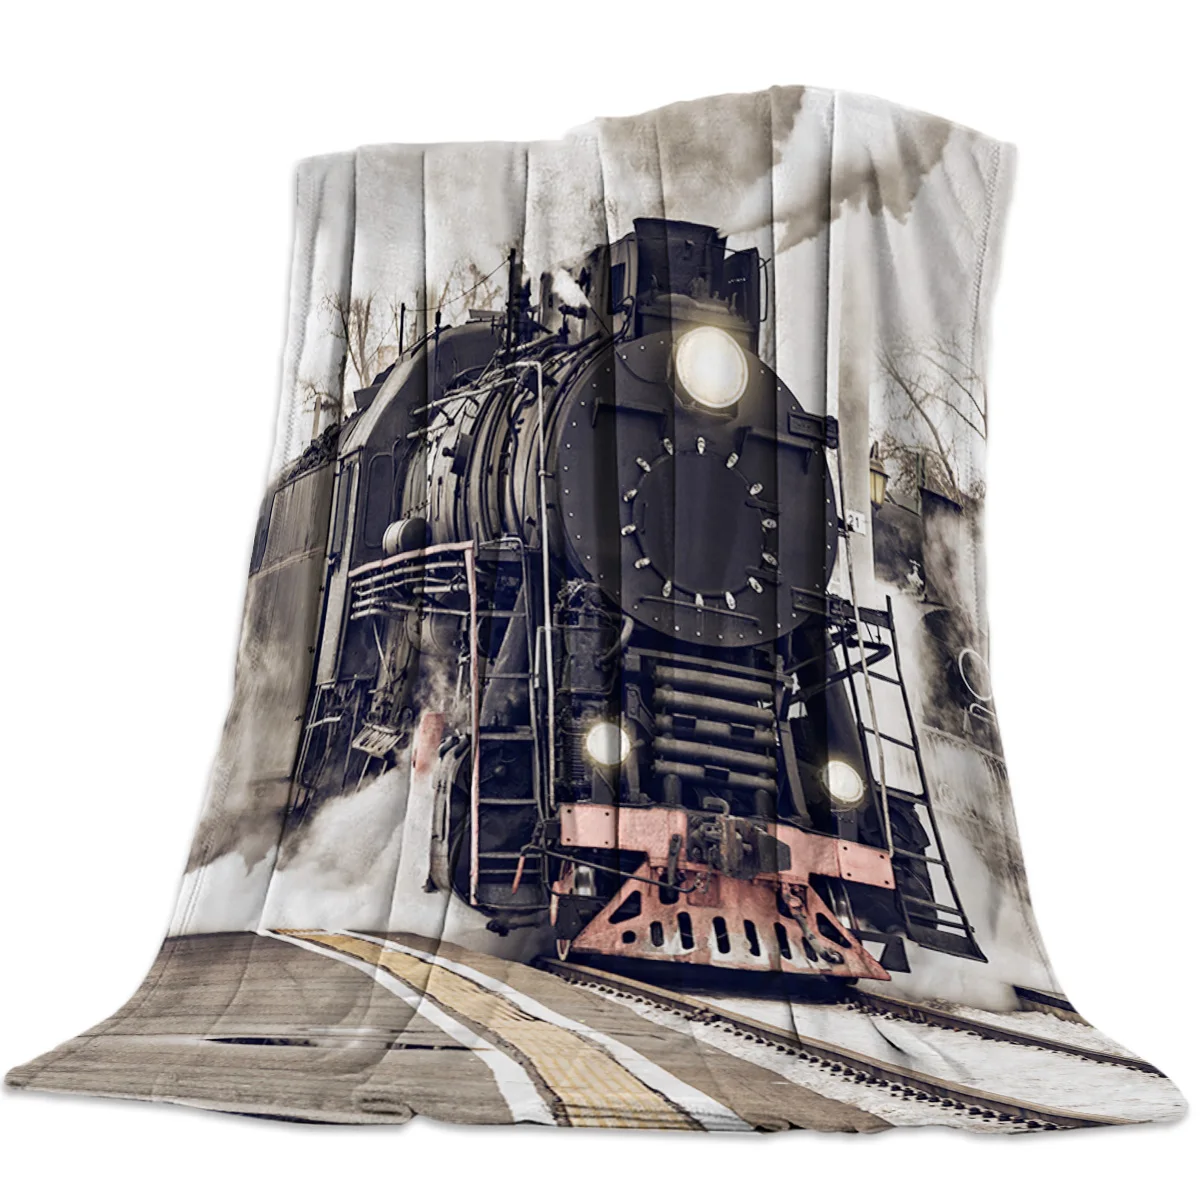 

Flannel Blankets The Steam Age of Old Trains Blanket Cushion Warm Throw Blanket on Sofa Bed Home Bedspread Travel Fleece Blanket